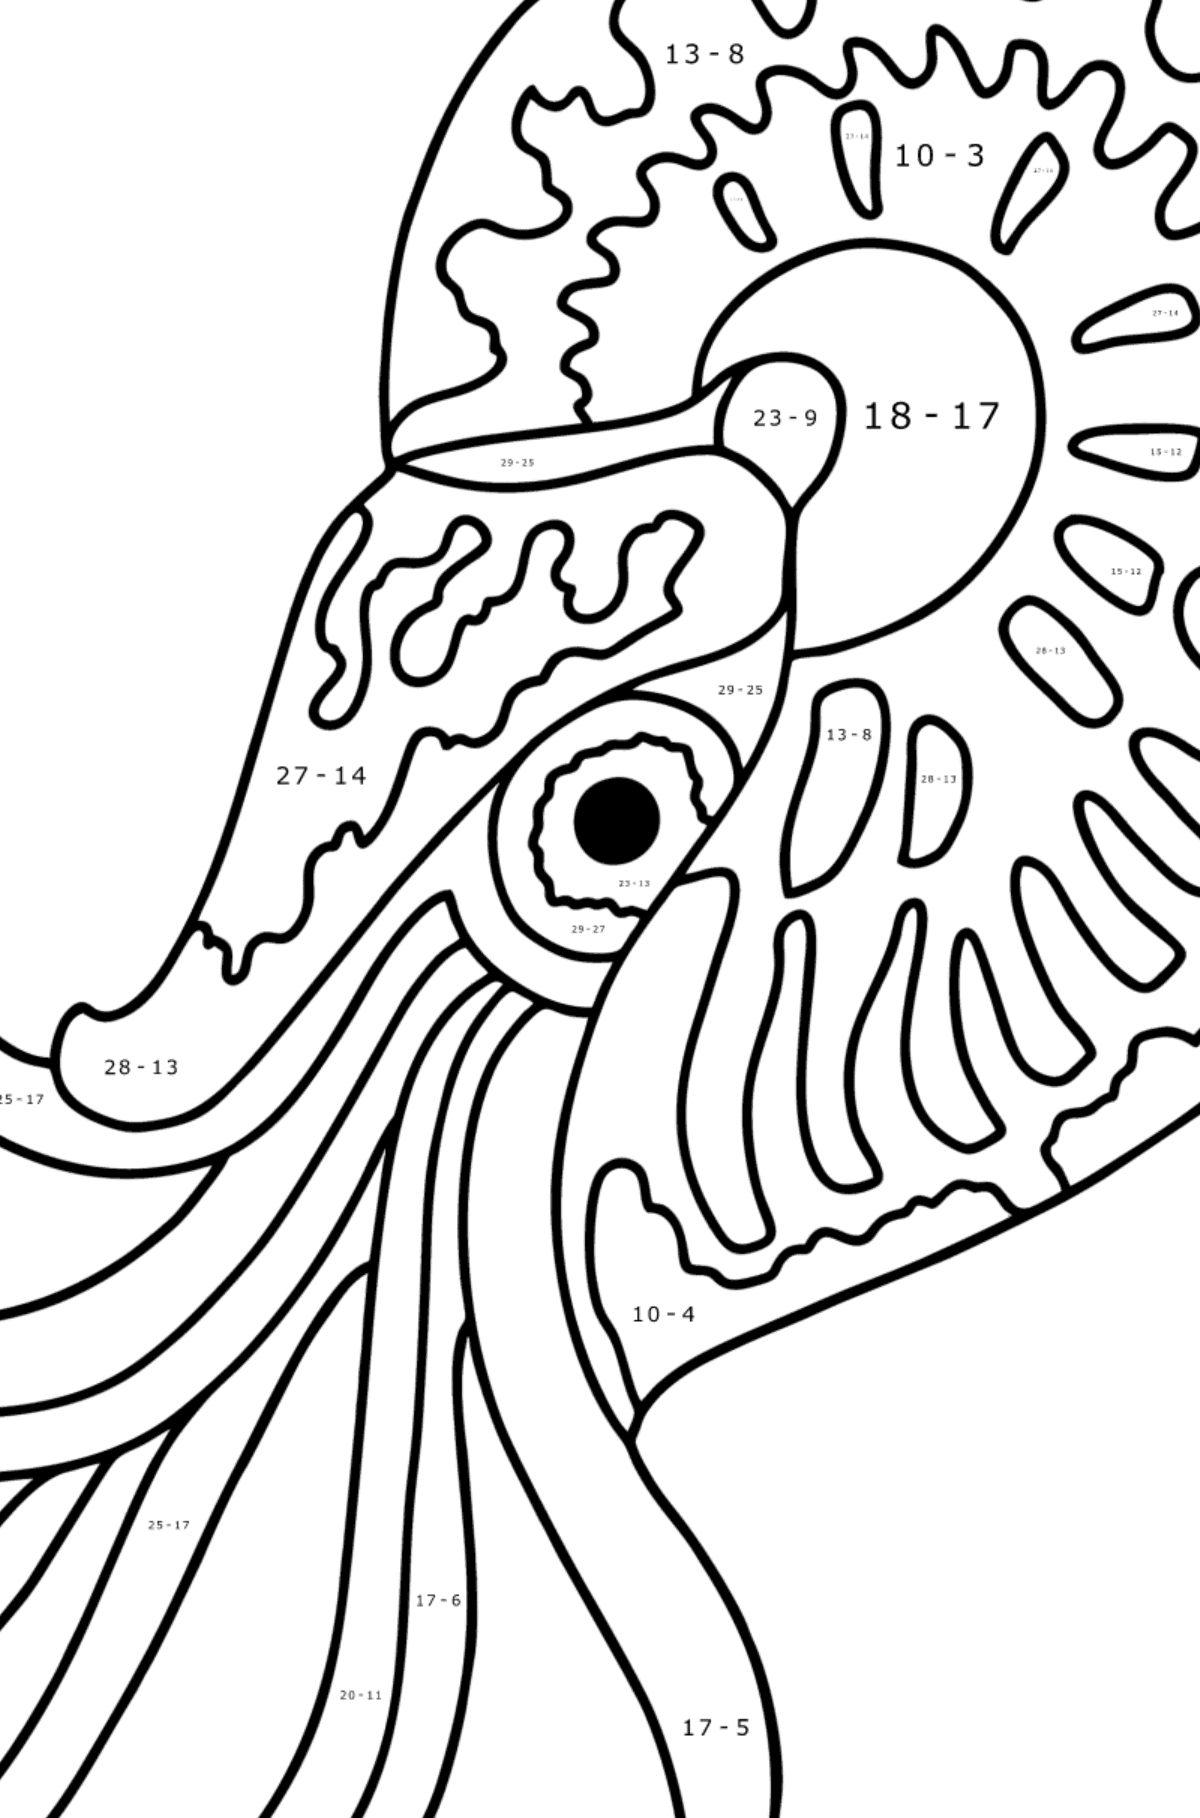 Nautilus coloring page - Math Coloring - Subtraction for Kids